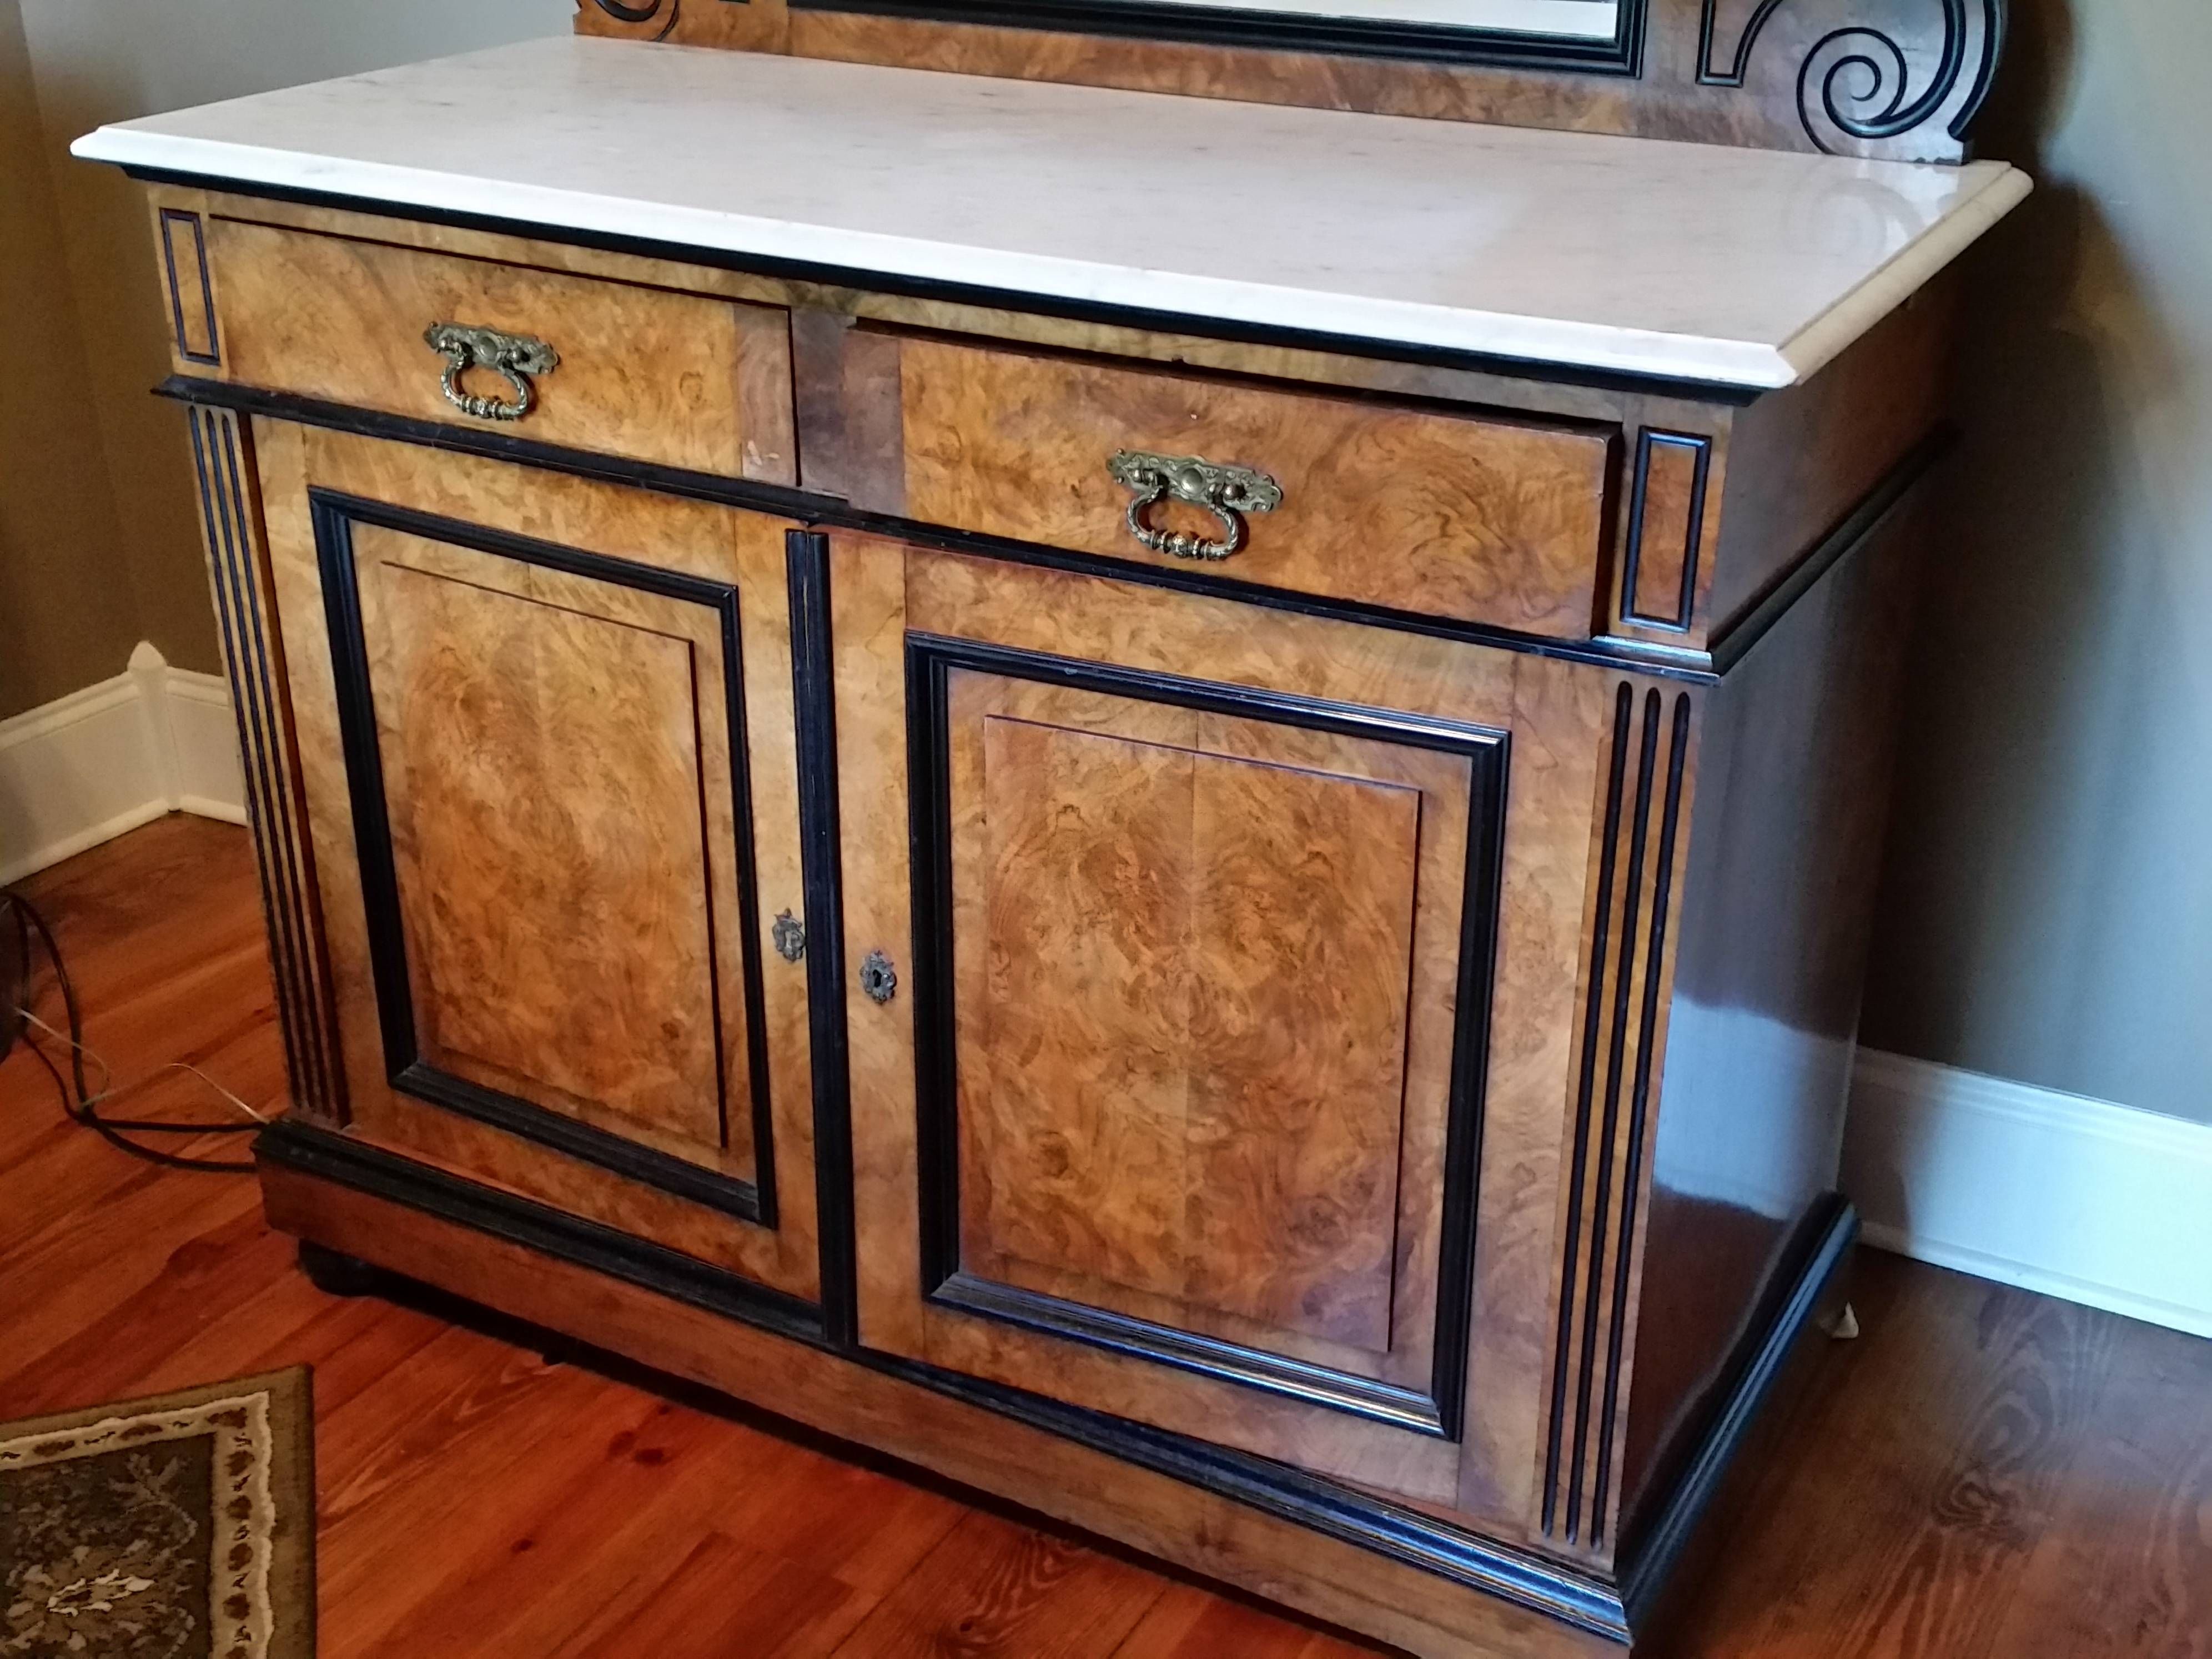 19th Century Buffet Sideboard For Sale | Antiques | Classifieds With Most Up To Date Antique Marble Top Sideboards (View 10 of 15)